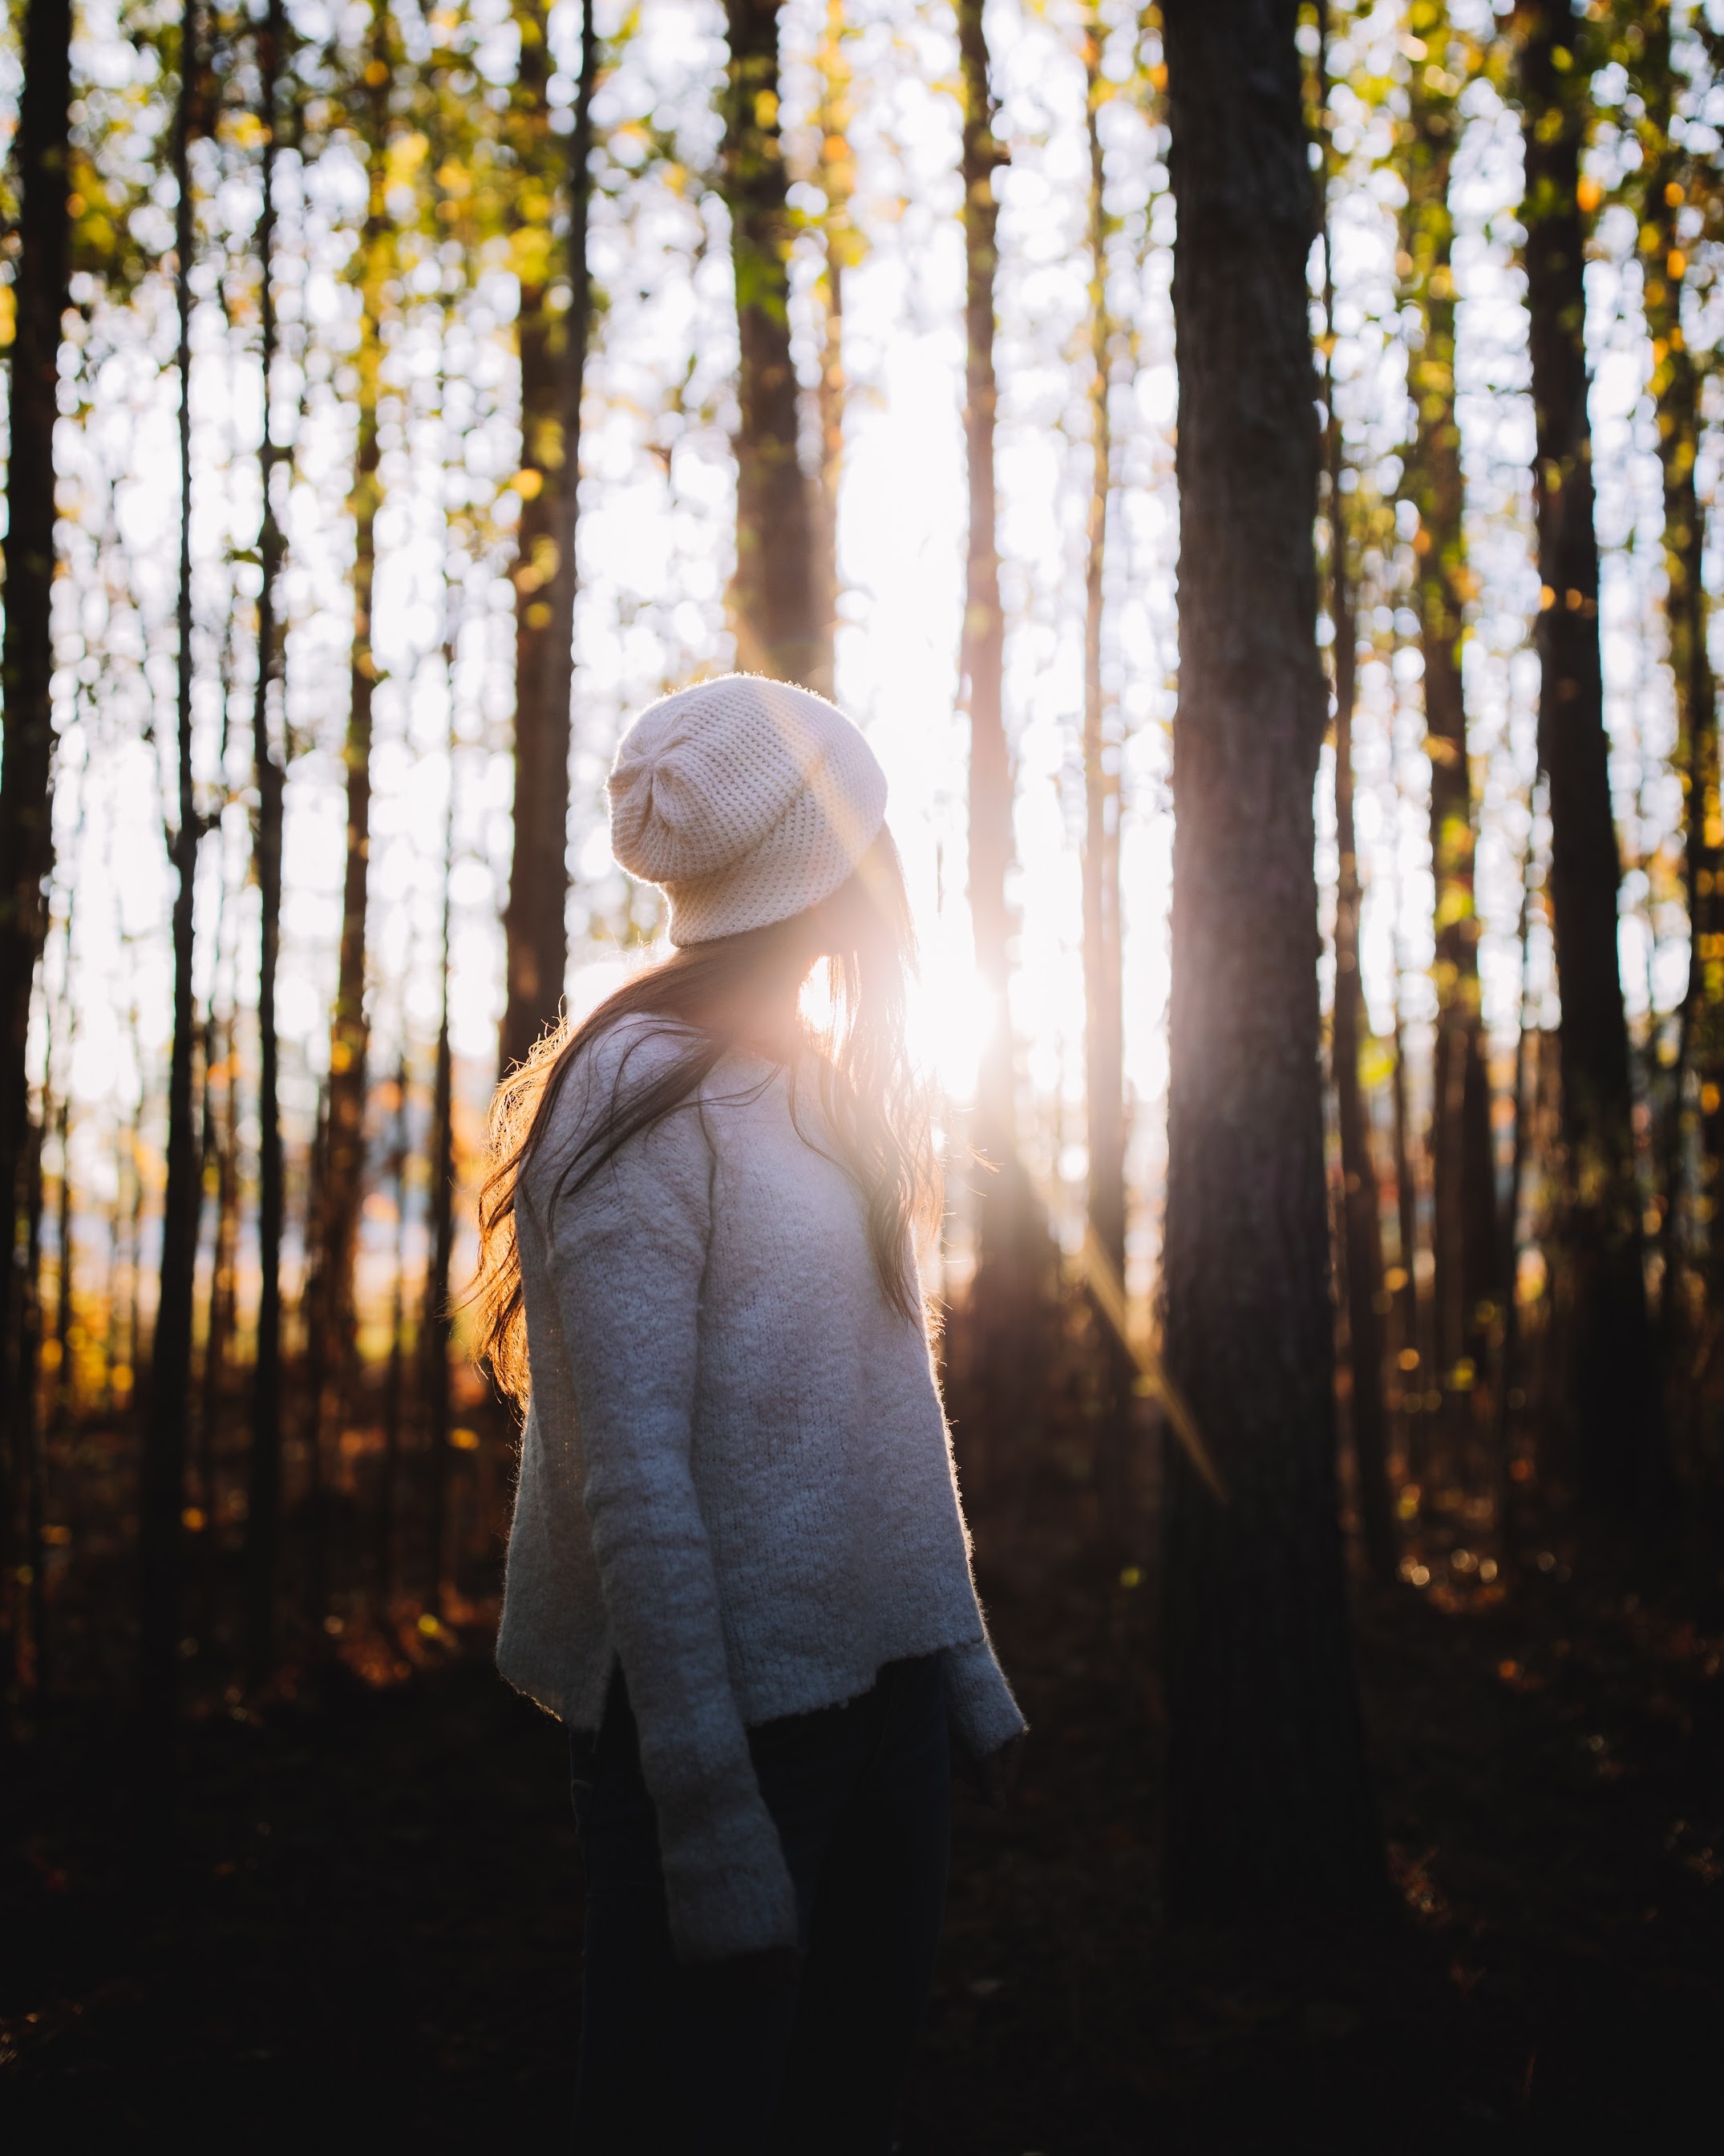 girl, miscellanea, sunlight, trees, glare, miscellaneous, forest High Definition image